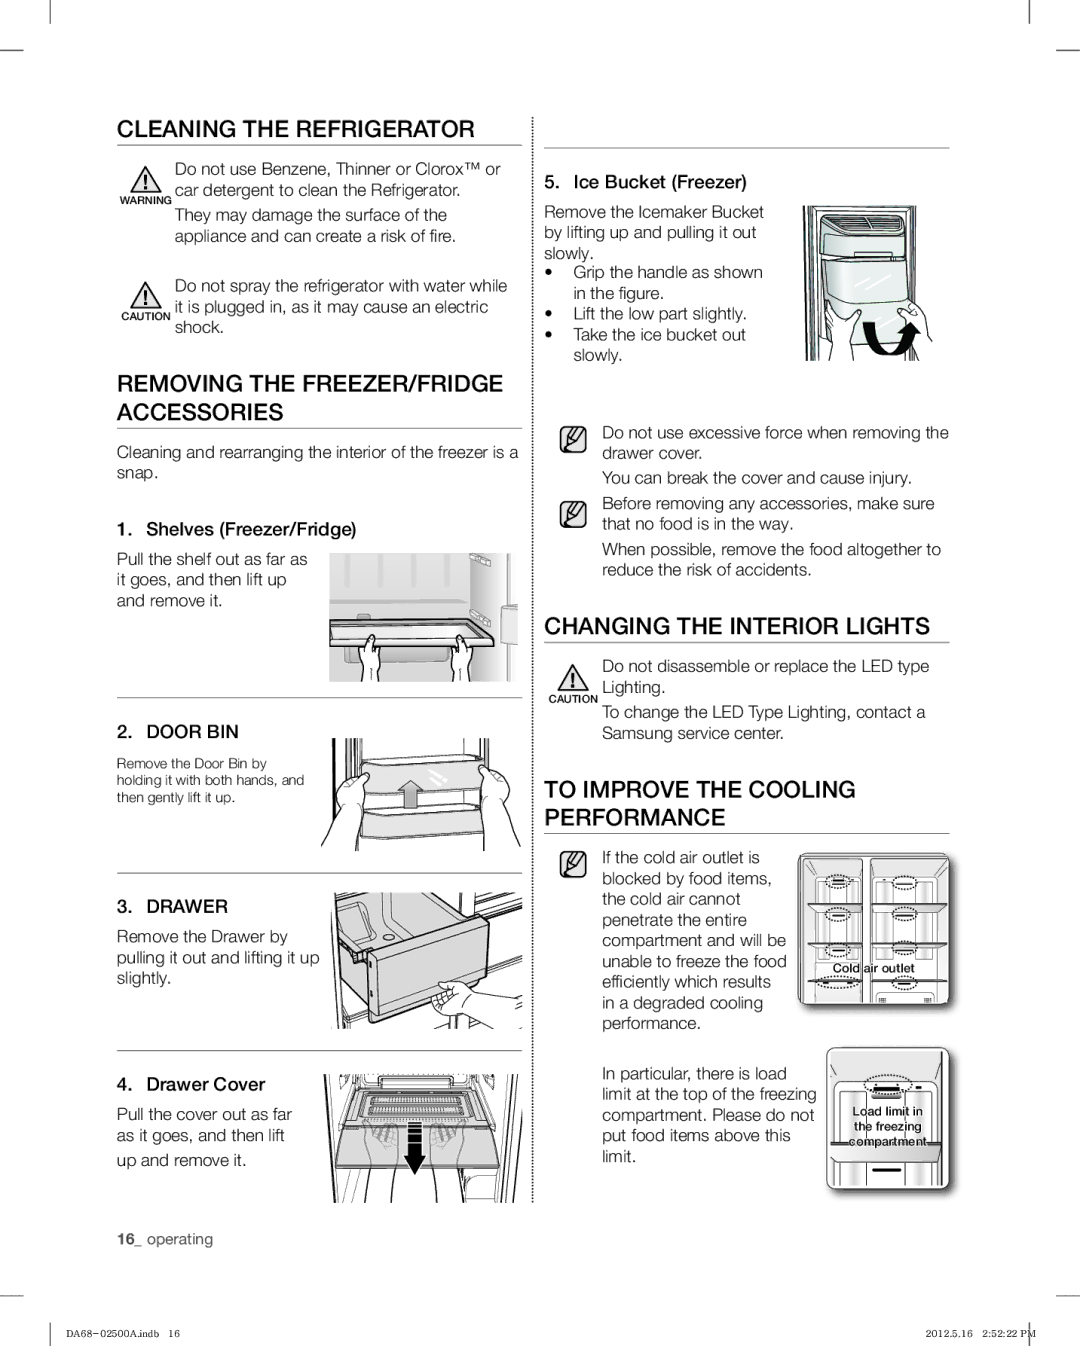 Samsung RSG307 user manual Cleaning the Refrigerator, Removing the FREEZER/FRIDGE Accessories, Changing the Interior Lights 